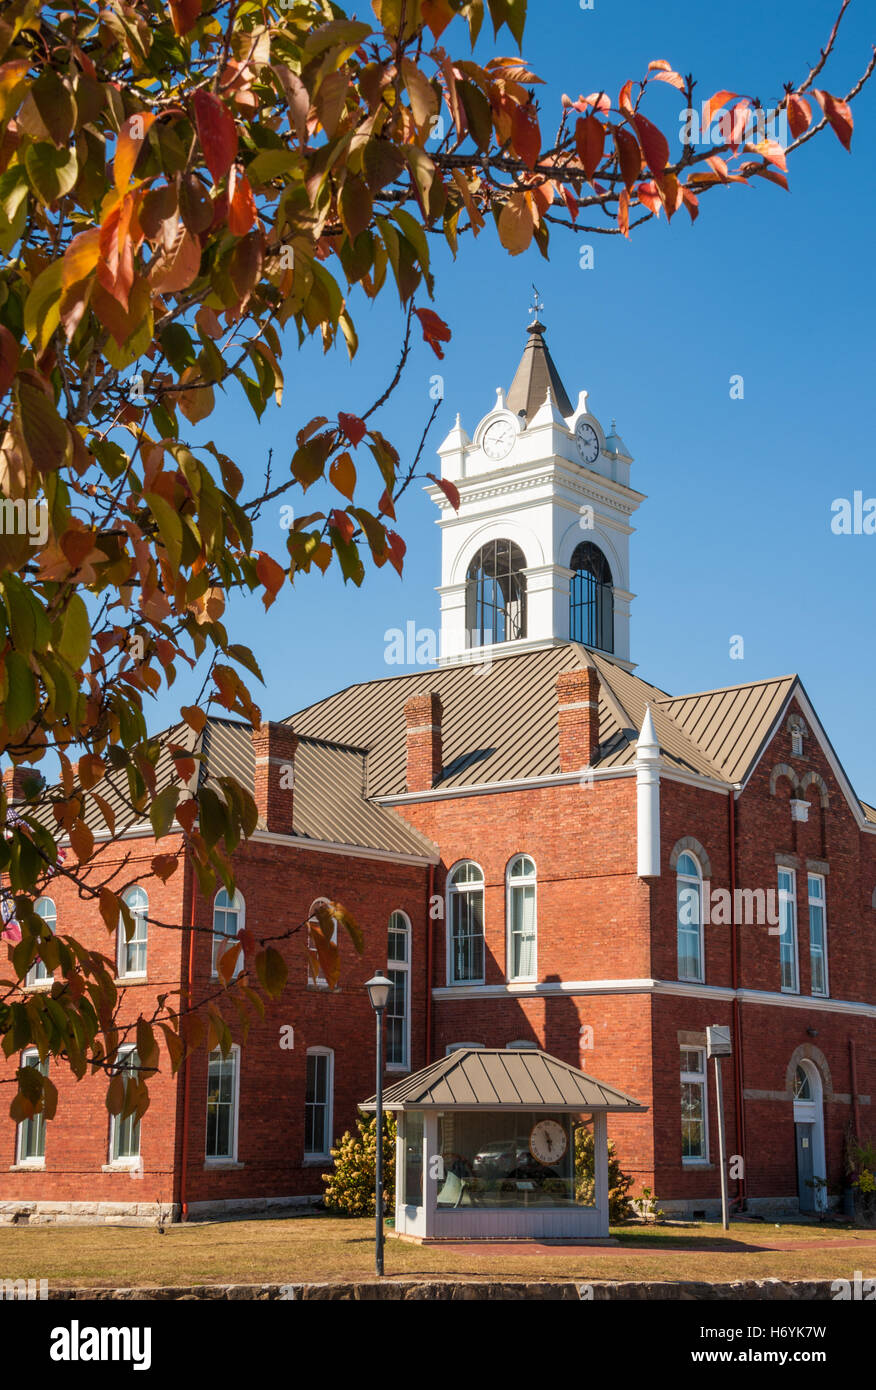 The Historic Union County Courthouse, built in 1899, on the town square in the mountain community of Blairsville, Georgia. (USA) Stock Photo